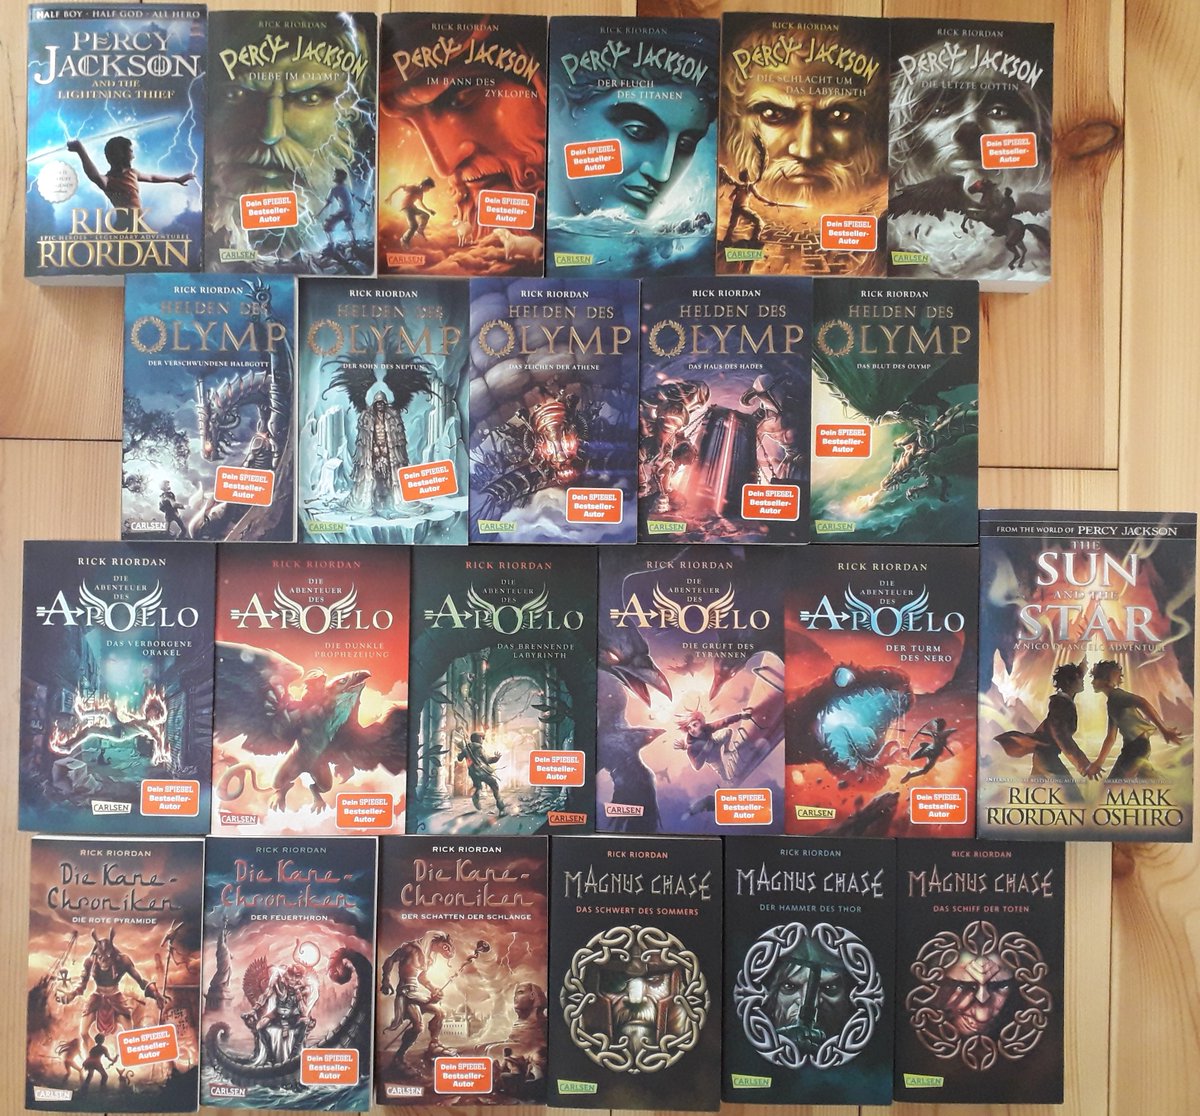 My @rickriordan-Verse collection is finally complete (for now)!! #PercyJackson